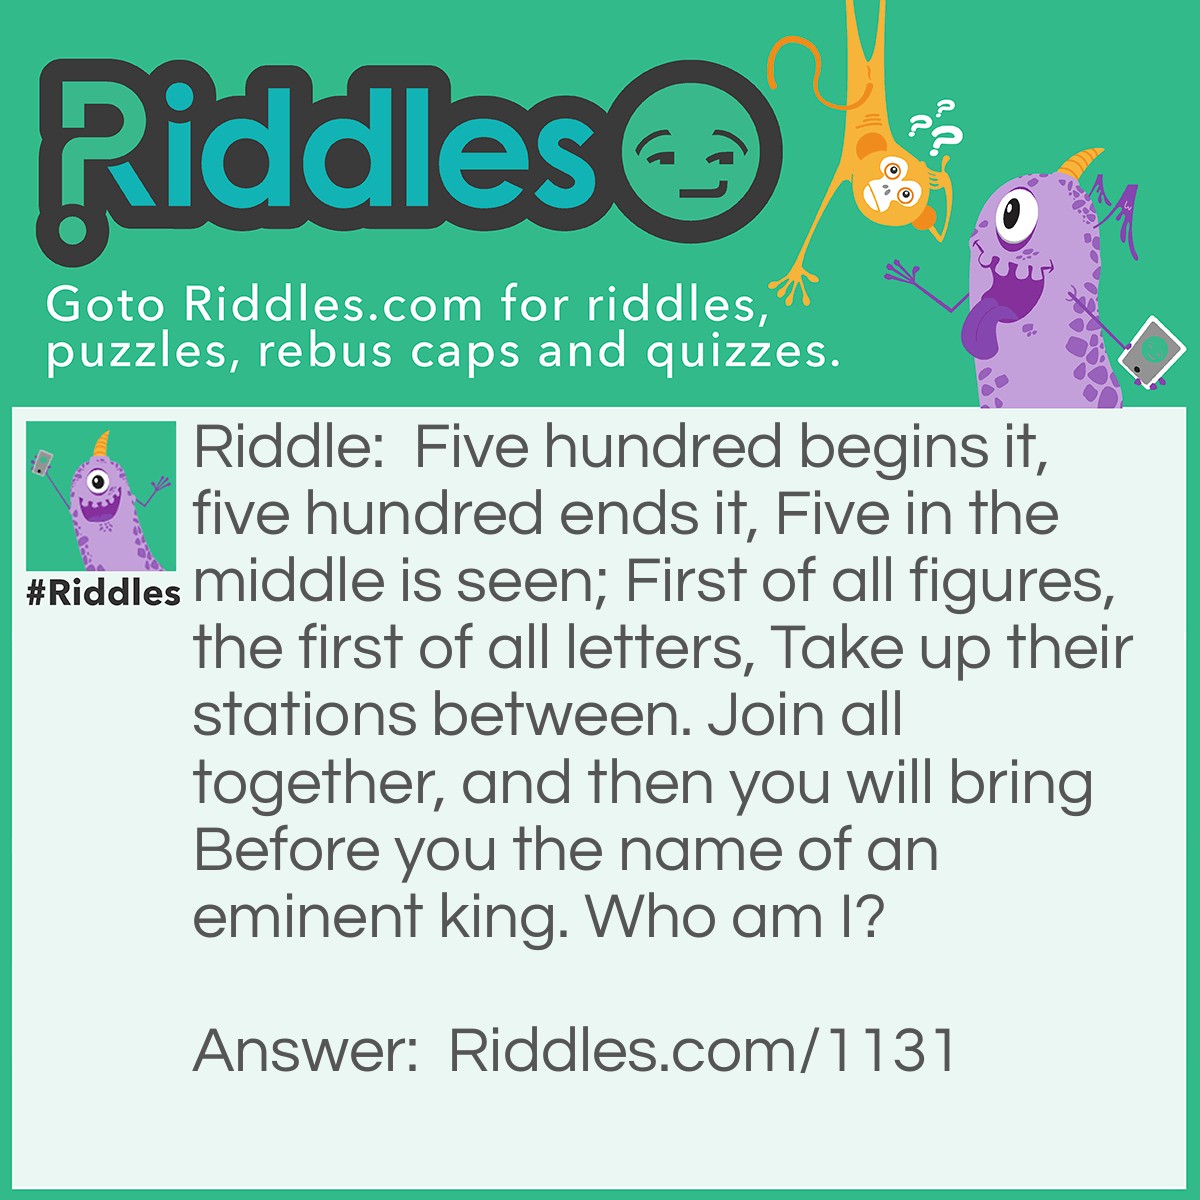 Riddle: Five hundred begins it, five hundred ends it, Five in the middle is seen; First of all figures, the first of all letters, Take up their stations between. Join all together, and then you will bring Before you the name of an eminent king. Who am I? Answer: DAVID (Roman numerals)